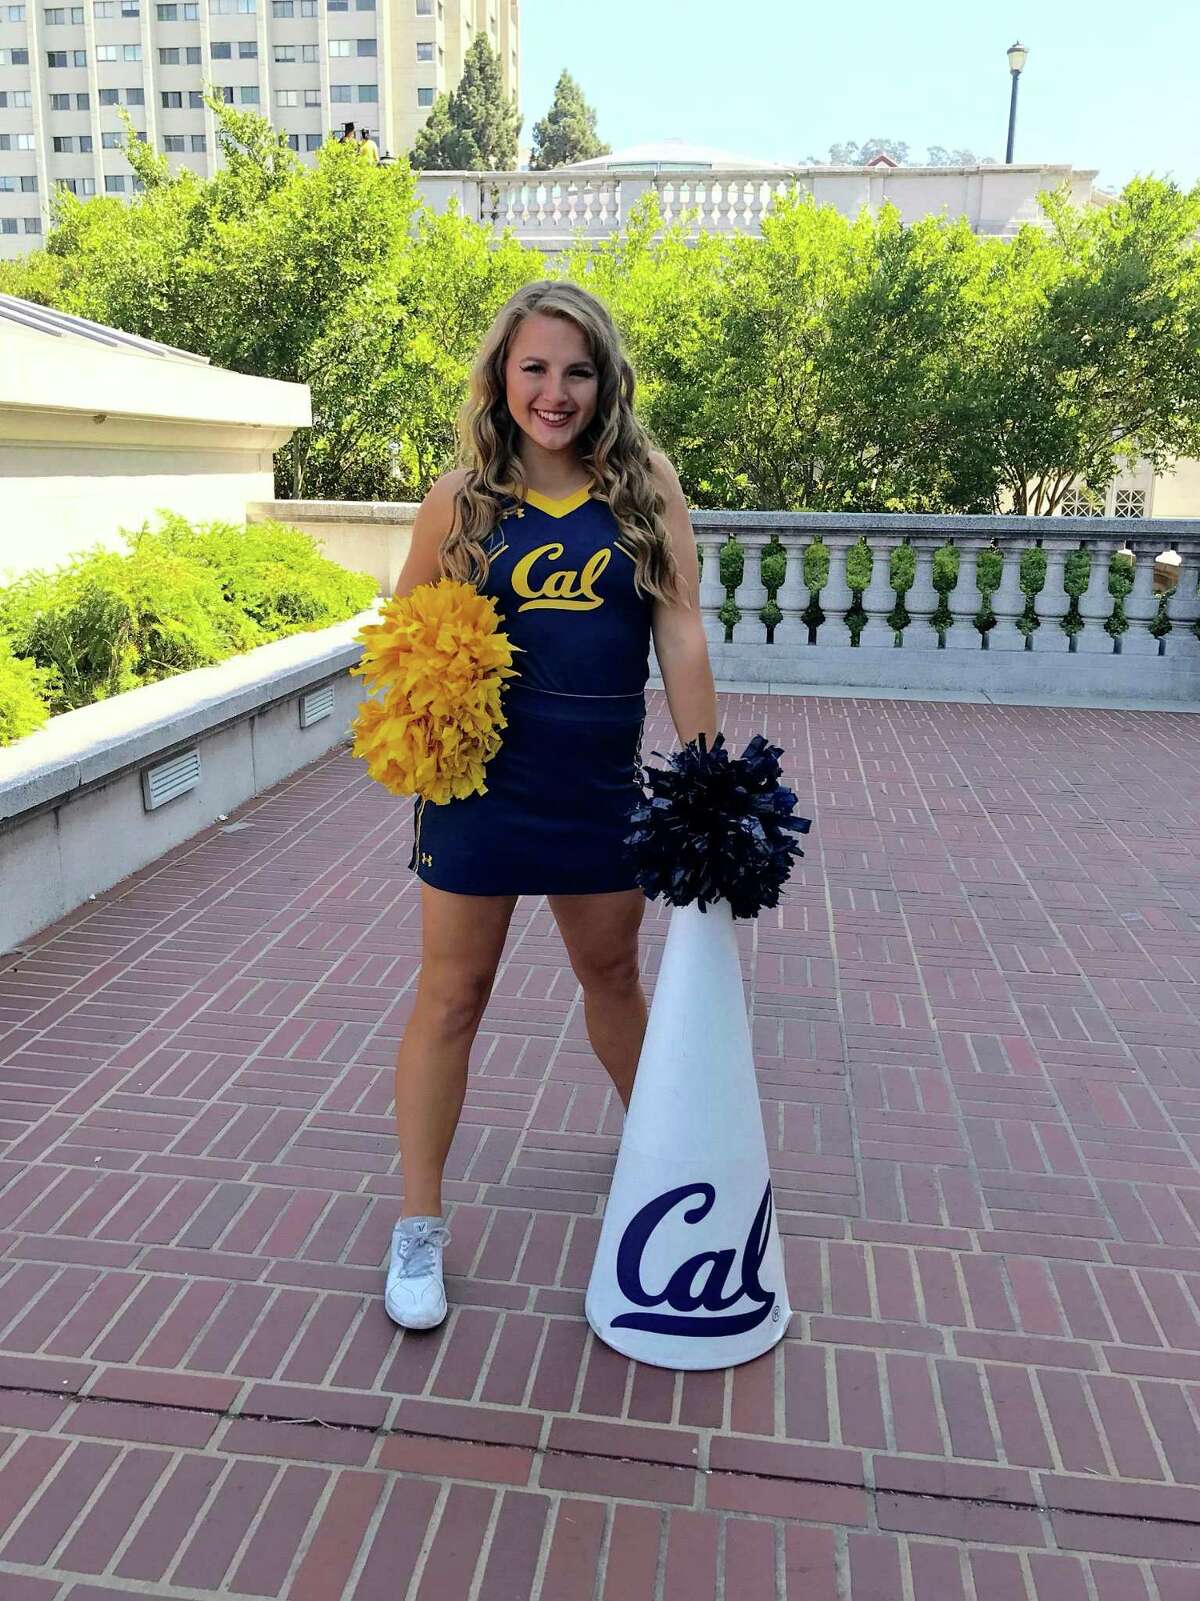 Former UC Berkeley cheerleader Melissa Martin sued the university over claims she was told to continue performing despite suffering concussions.